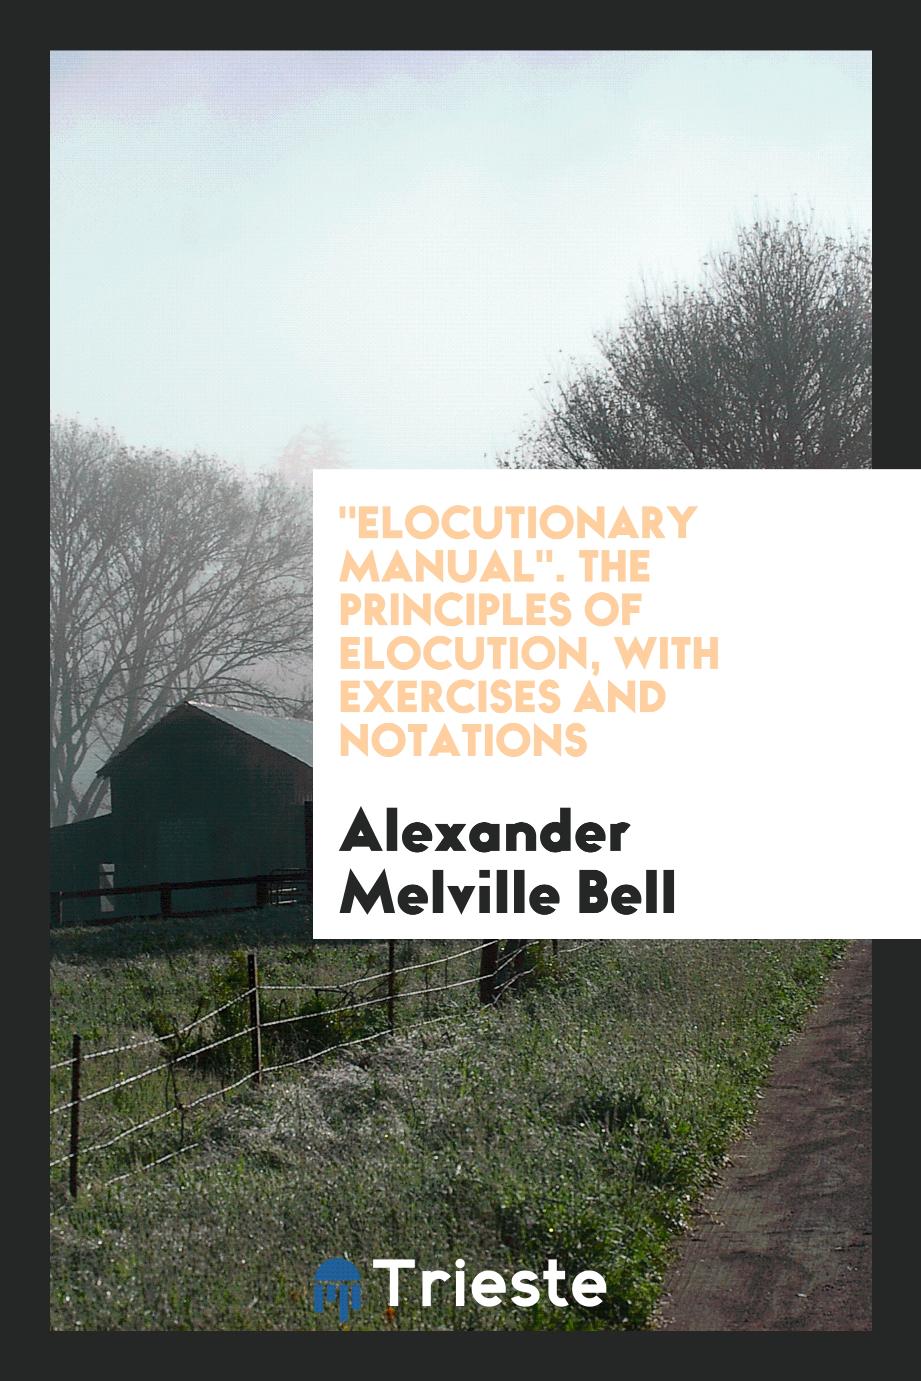 "Elocutionary Manual". The Principles of Elocution, with Exercises and Notations